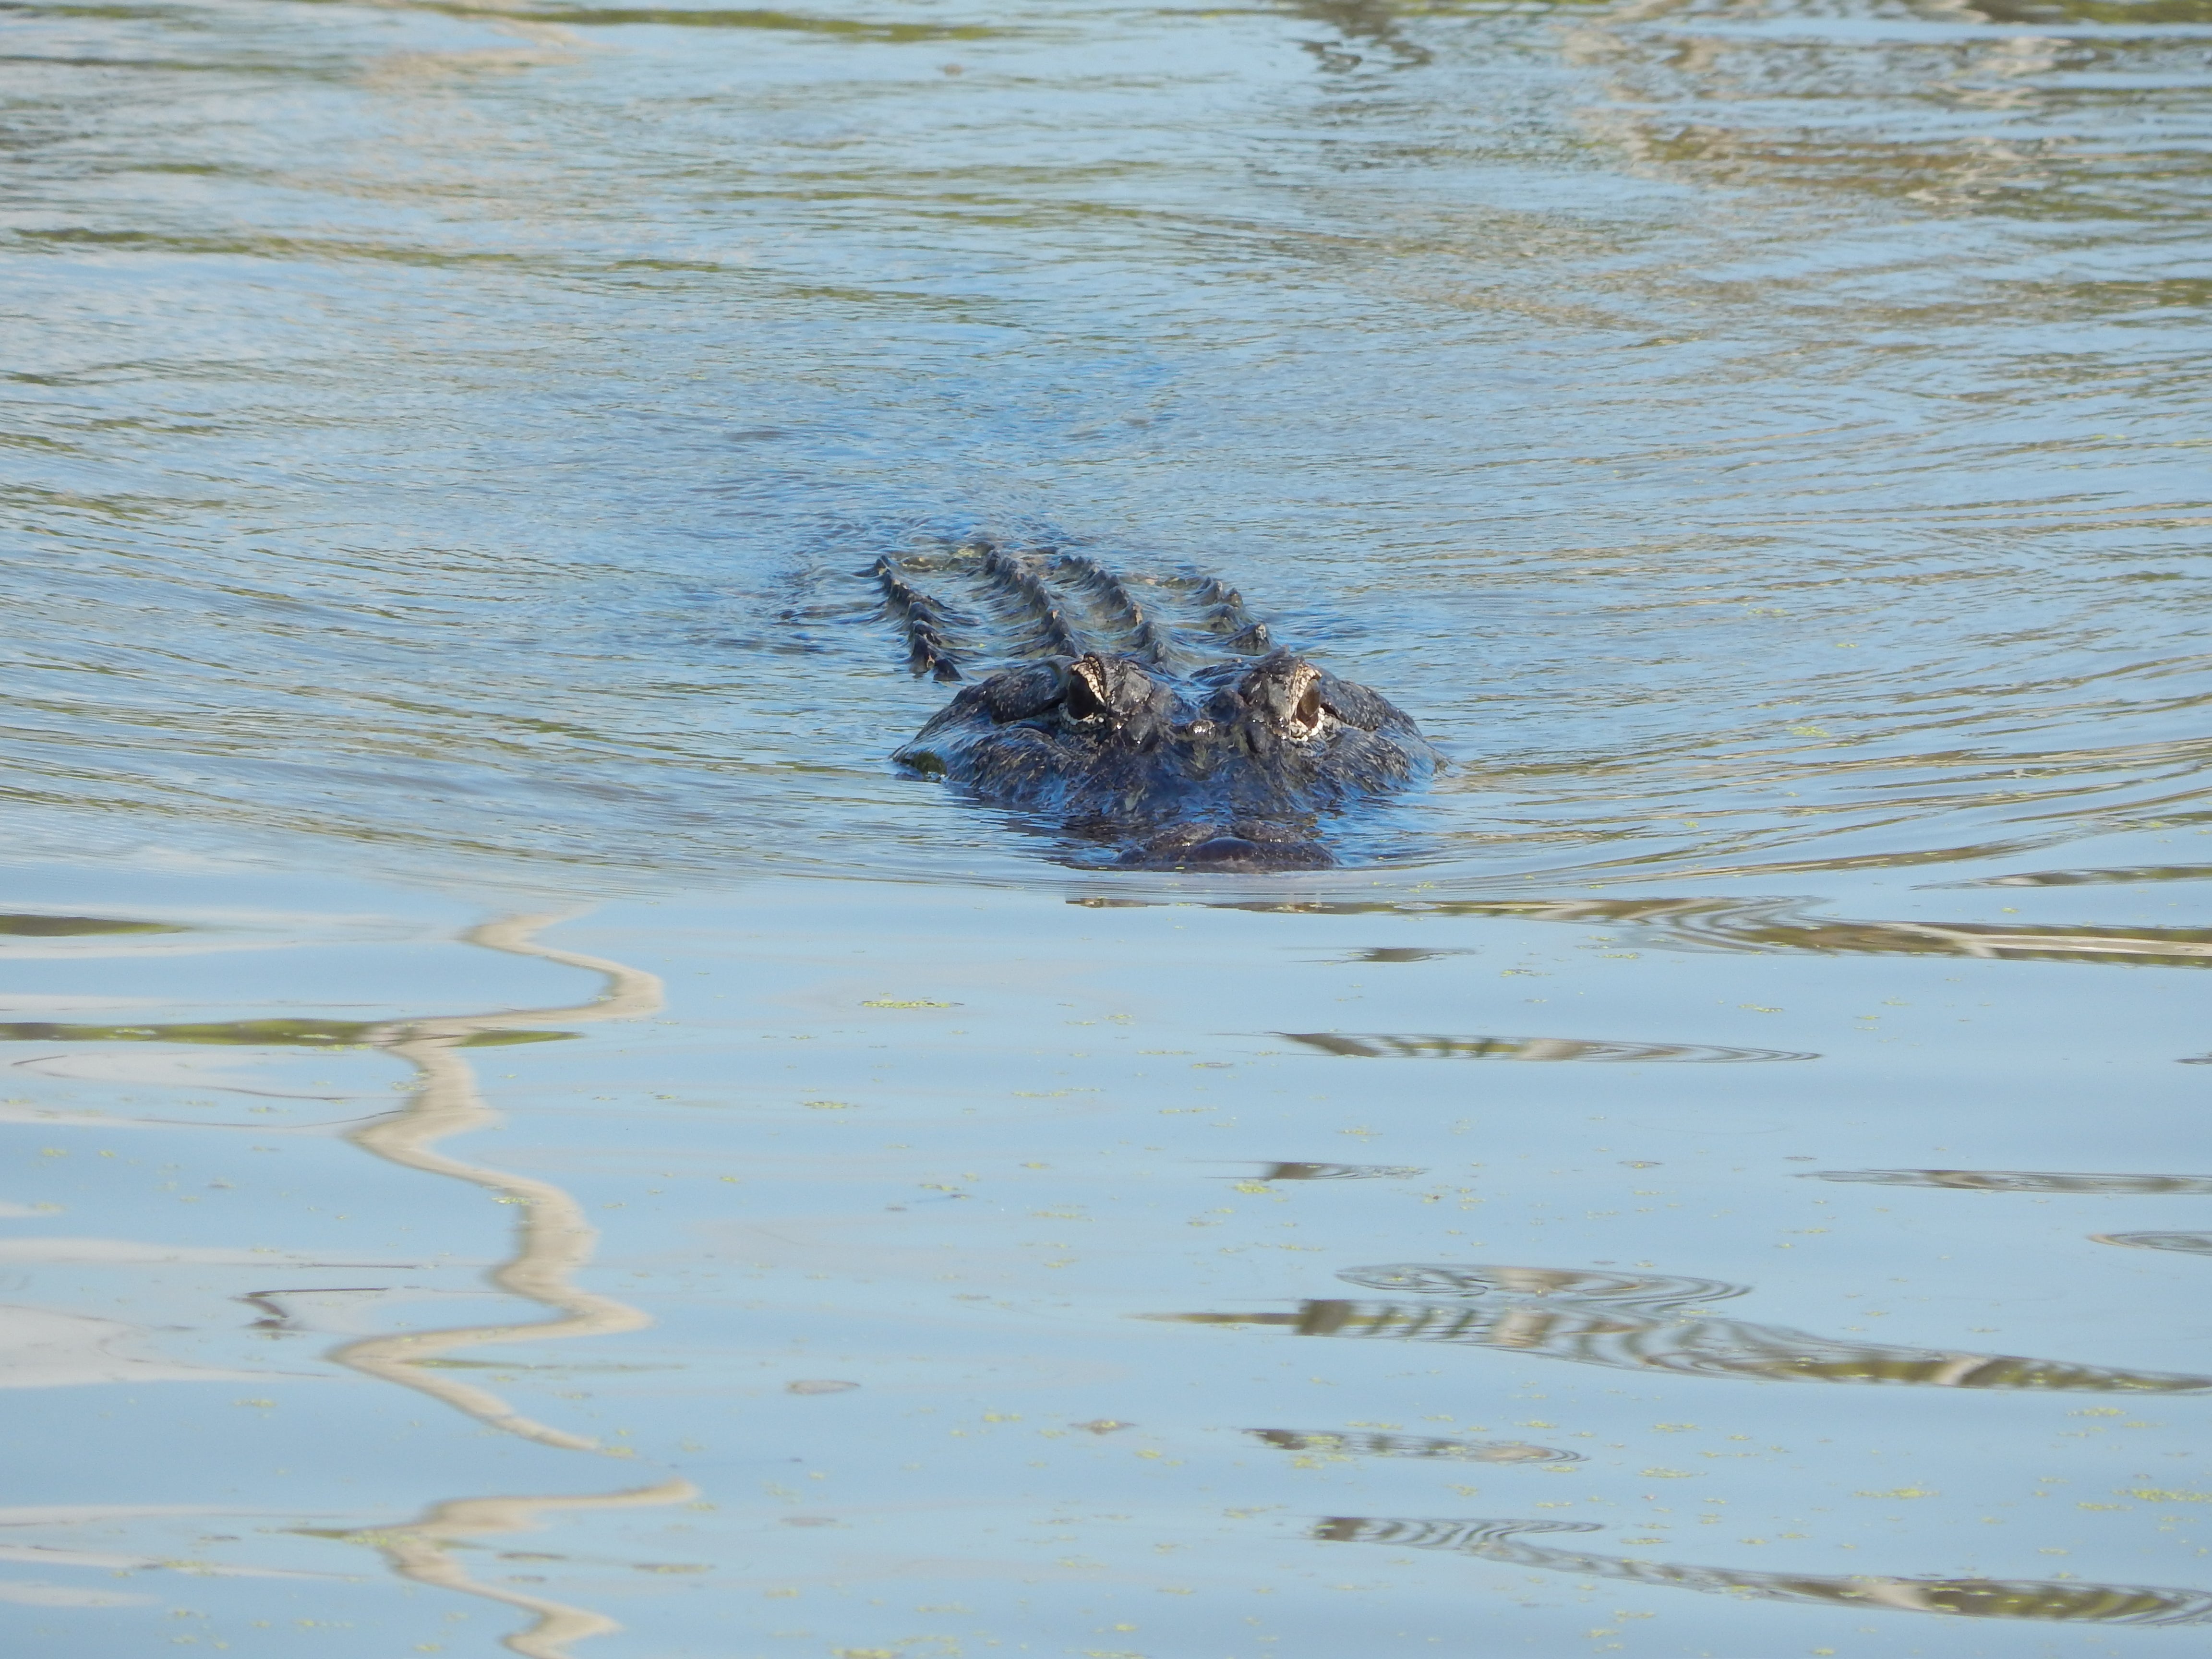 One of many alligators living in the diversion outfall area.